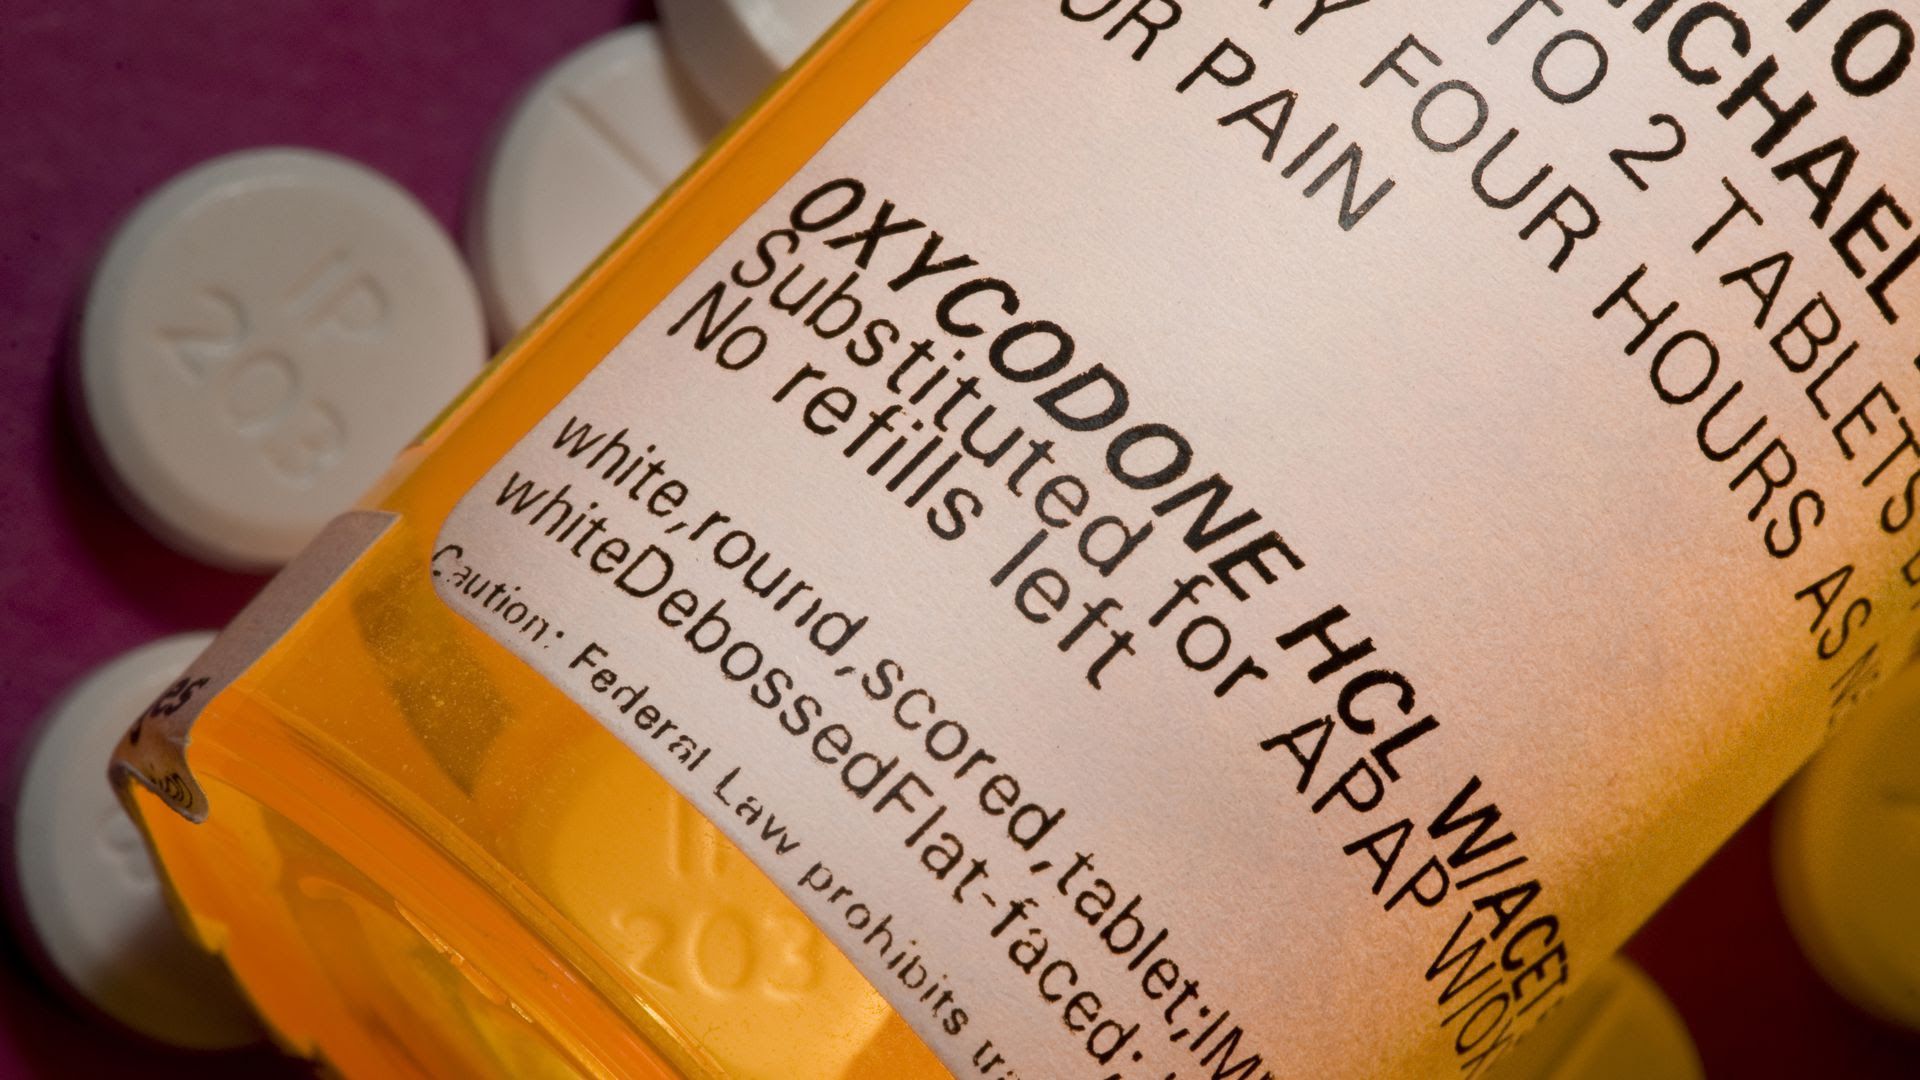 A bottle of oxycodone